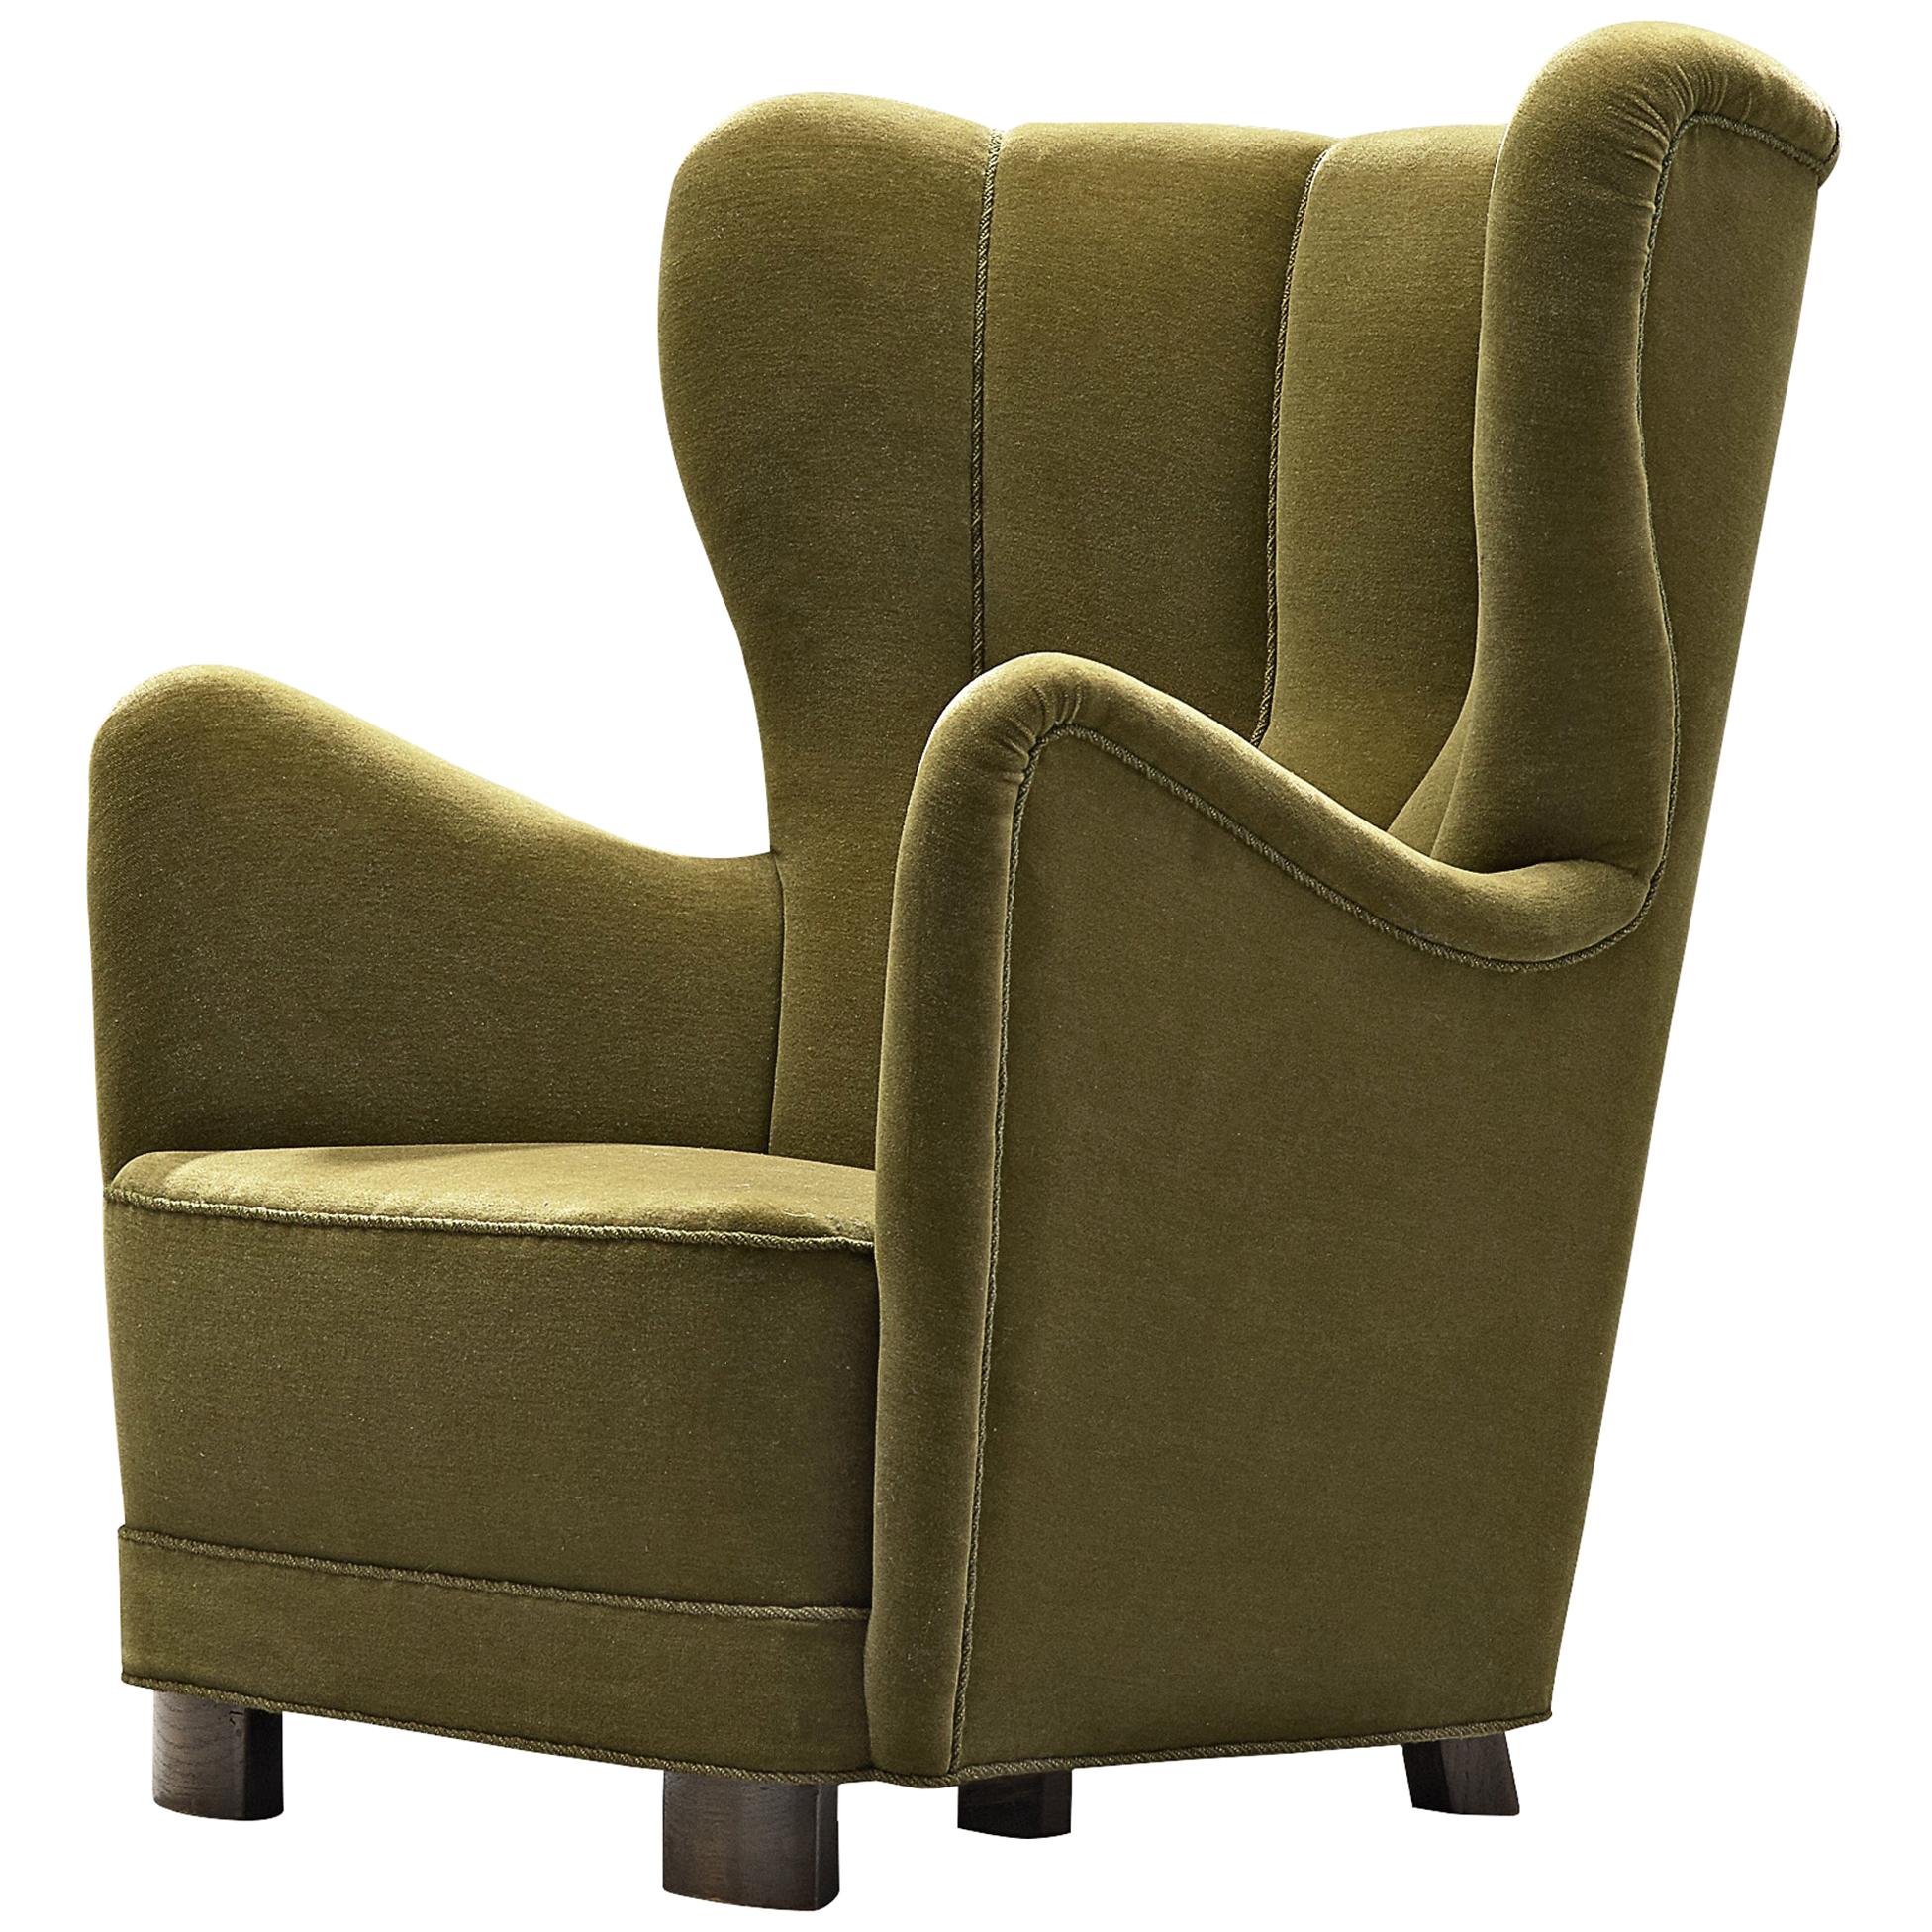 Danish Cabinetmaker's Lounge Chair in Green Upholstery